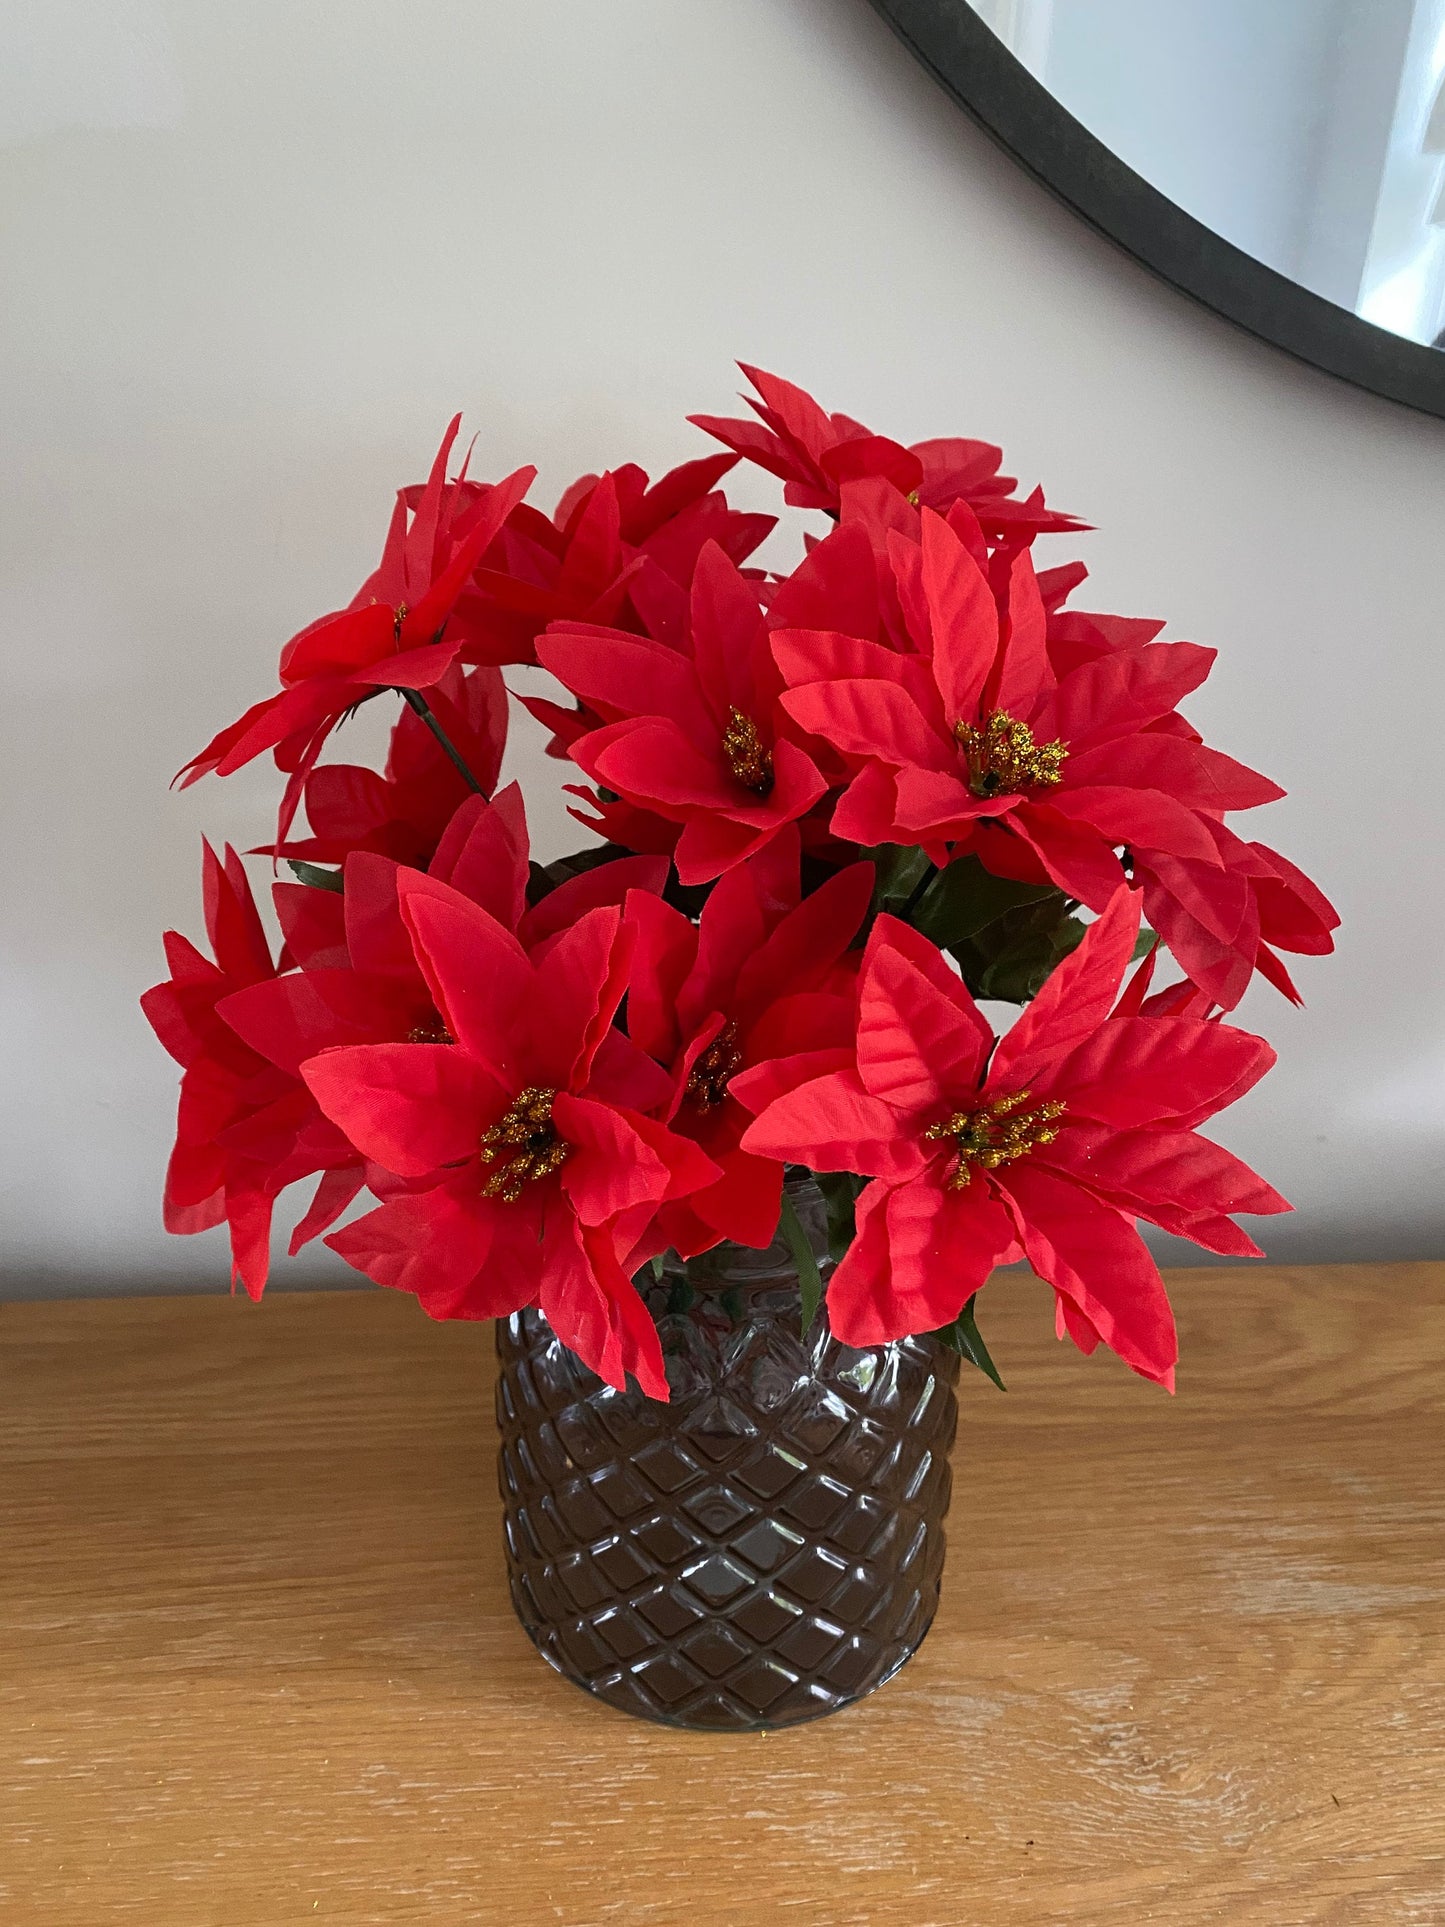 21 Head - 3  Bunches Artificial Red Poinsettias  Christmas Flowers 30 CM Length